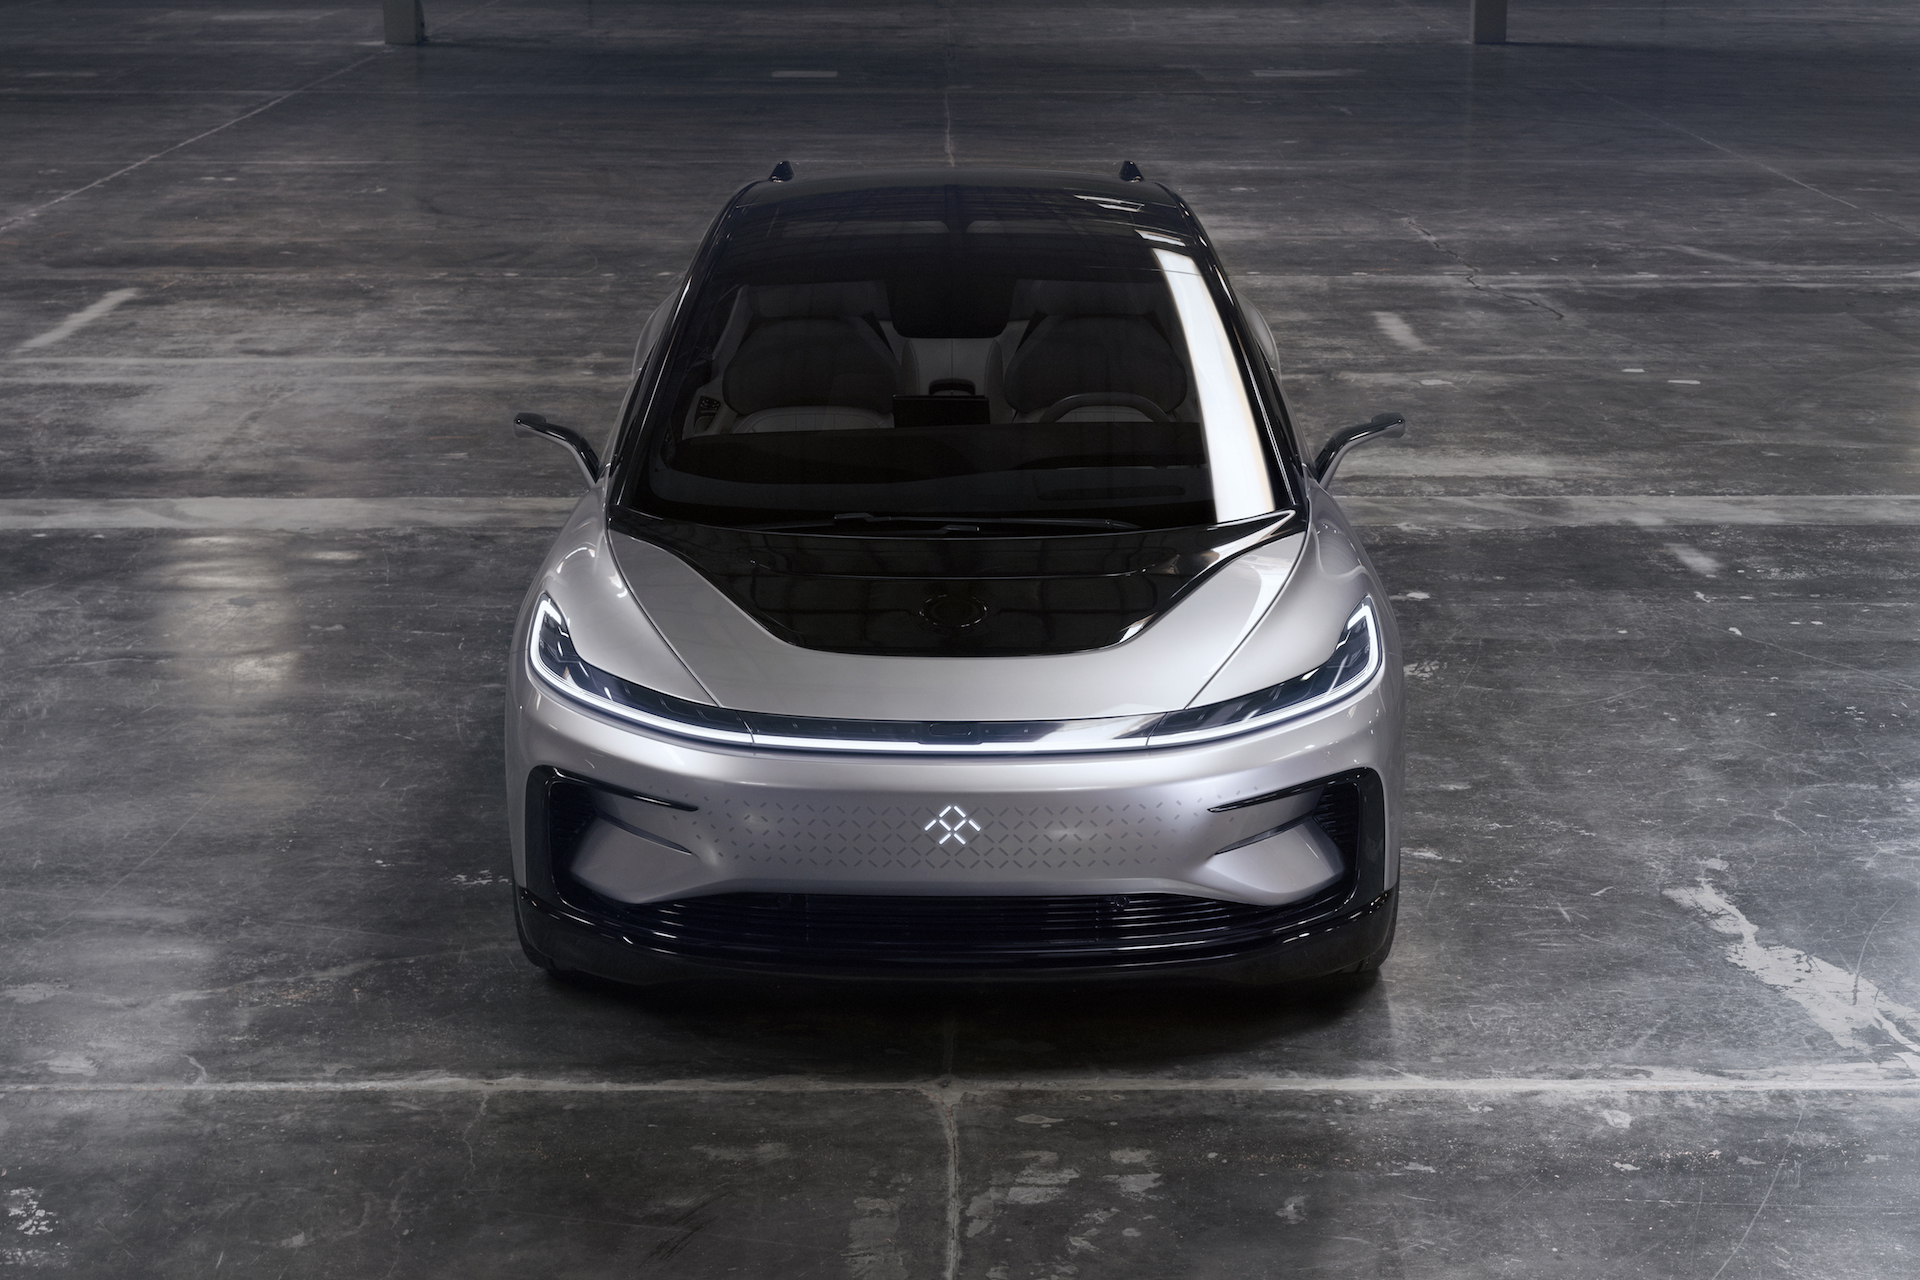 Faraday Future unveils FF 91, its first production electric car